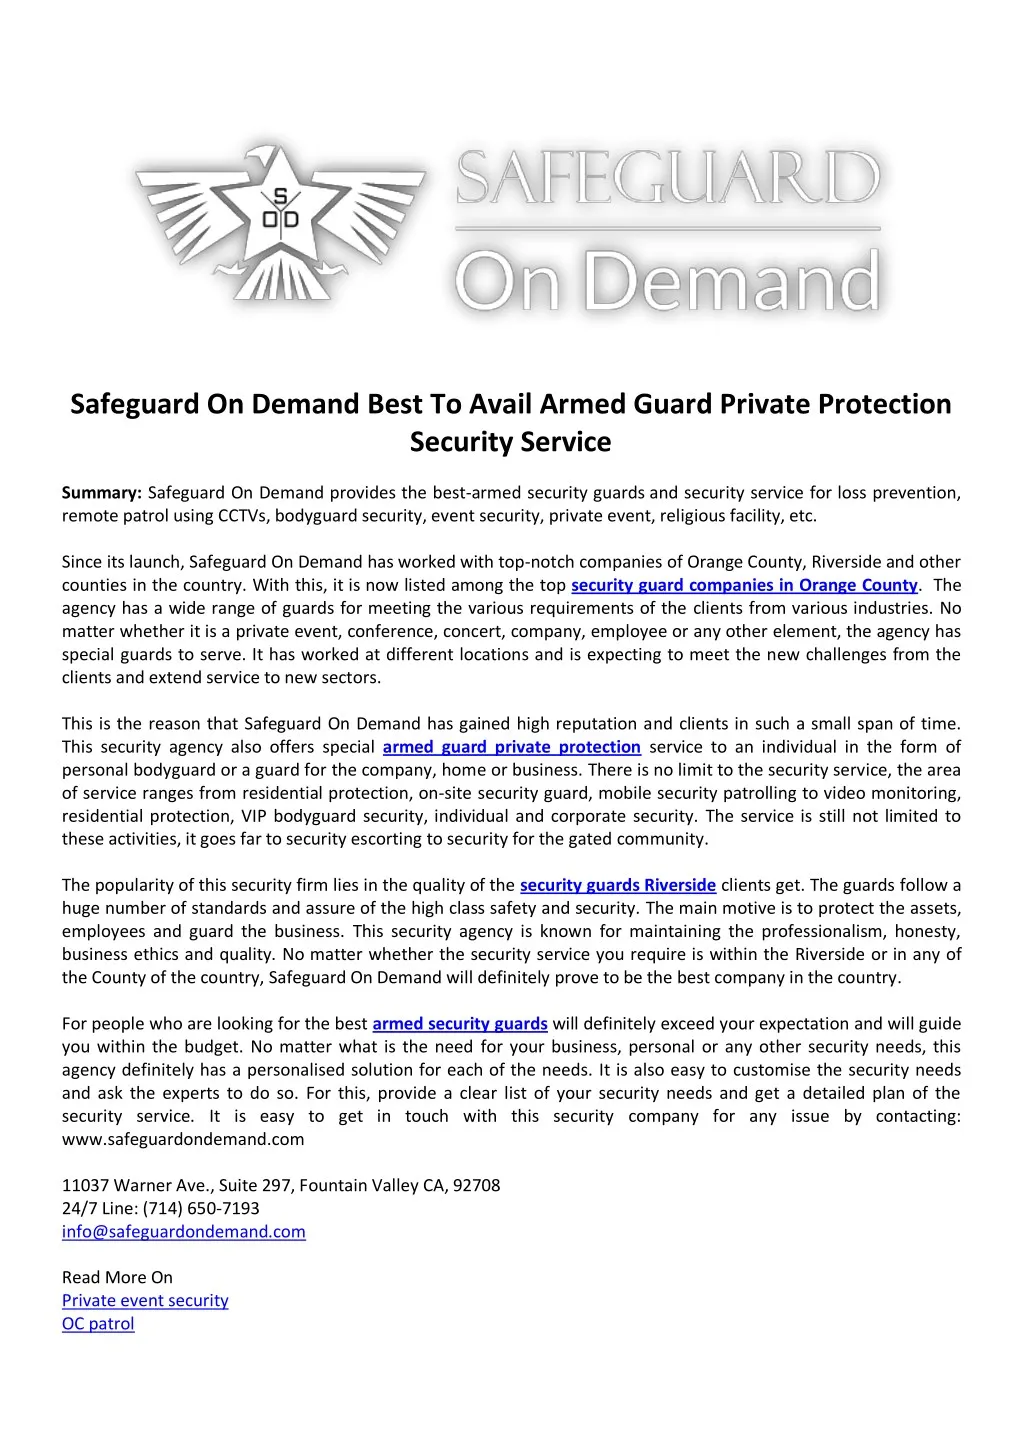 safeguard on demand best to avail armed guard